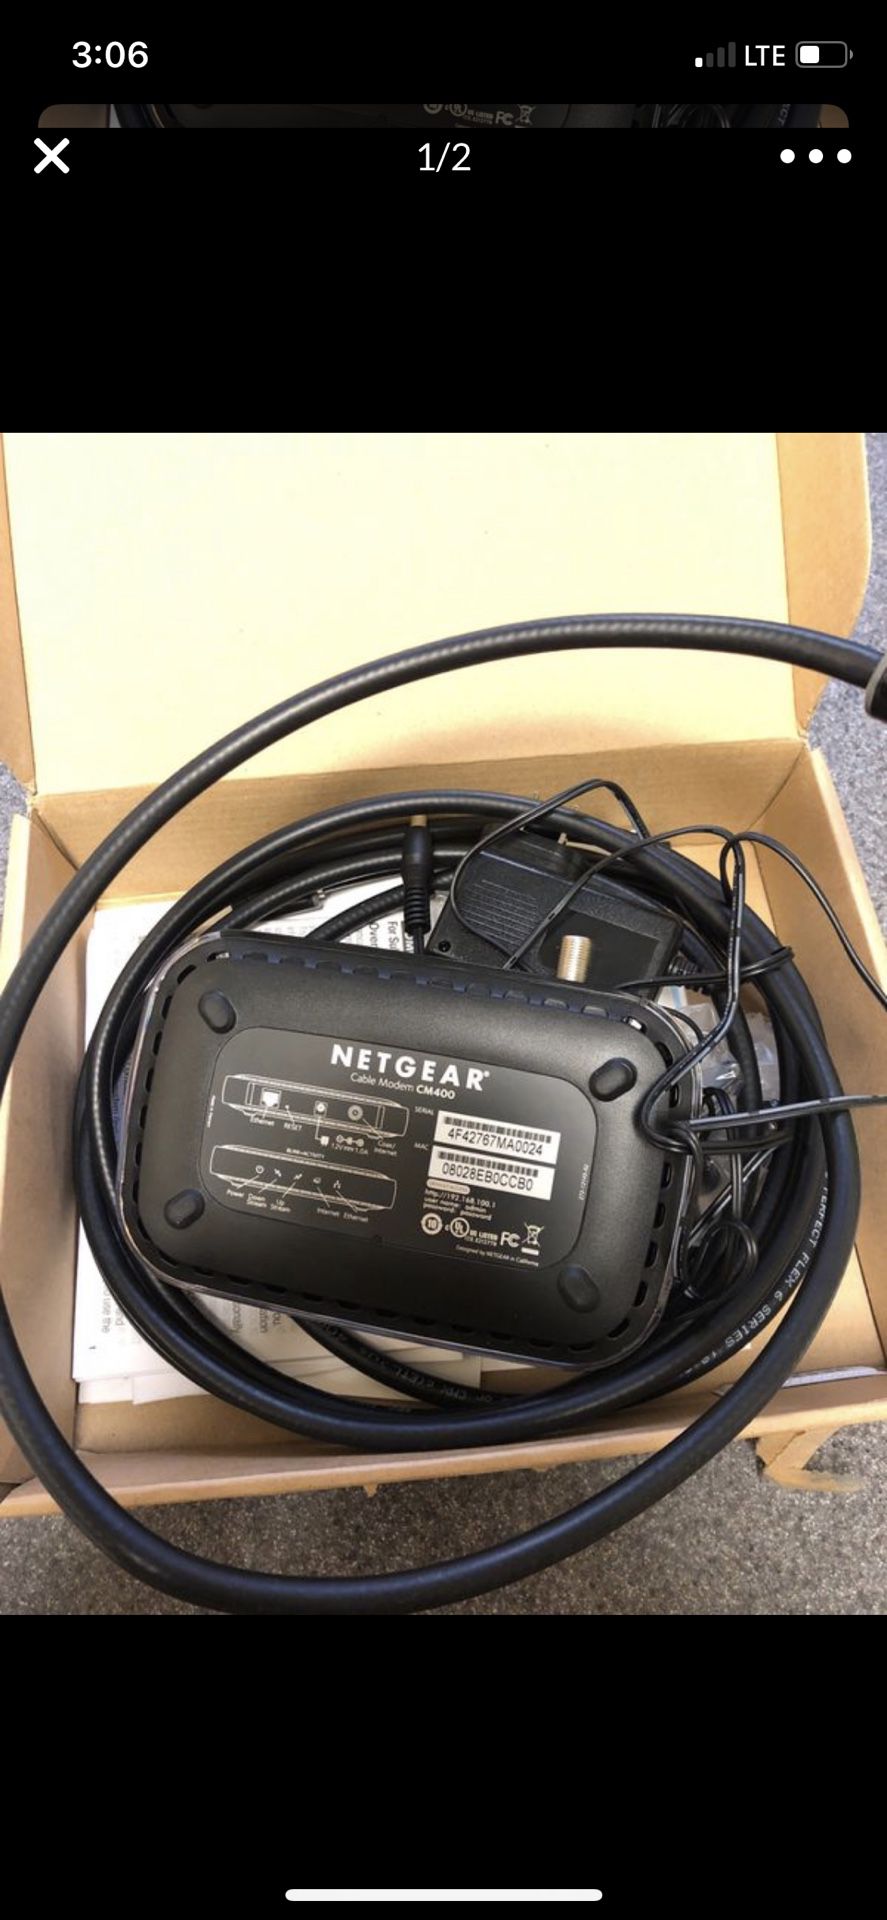 Netgear cable modem CM400 with coax cable